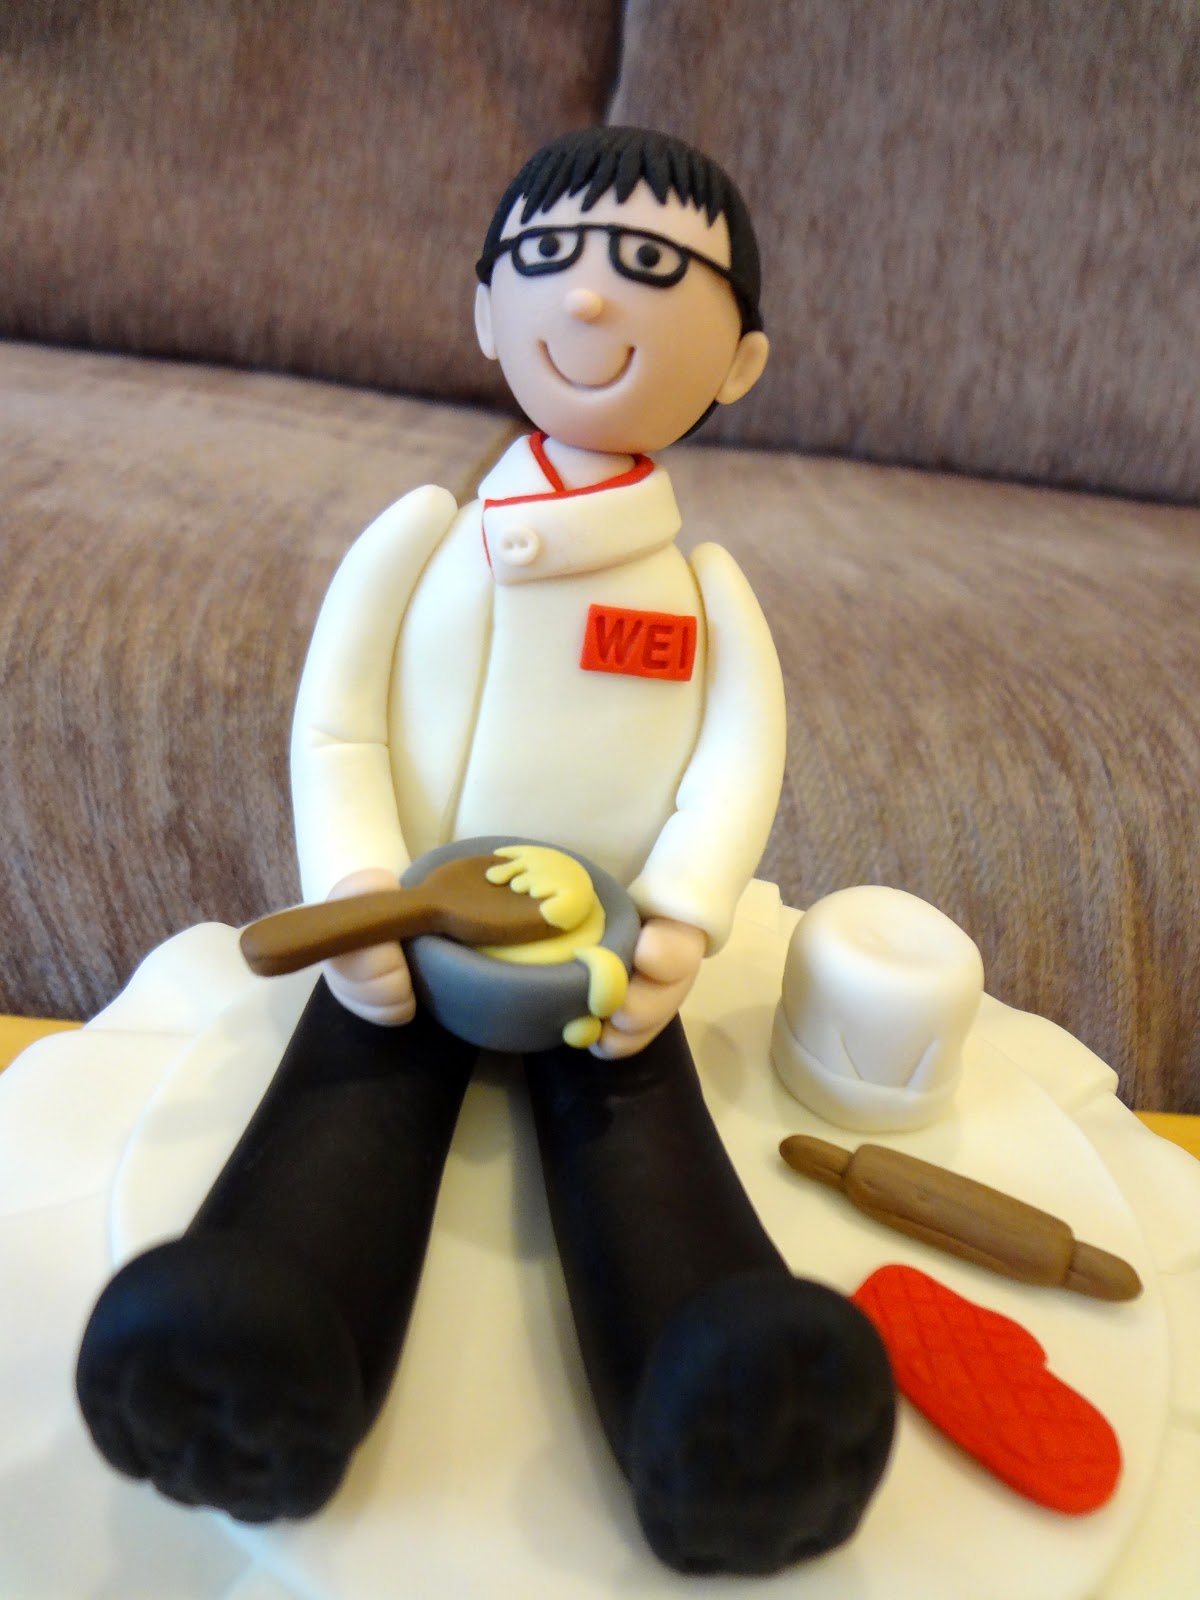 she loves cookie...: our pastry chef...